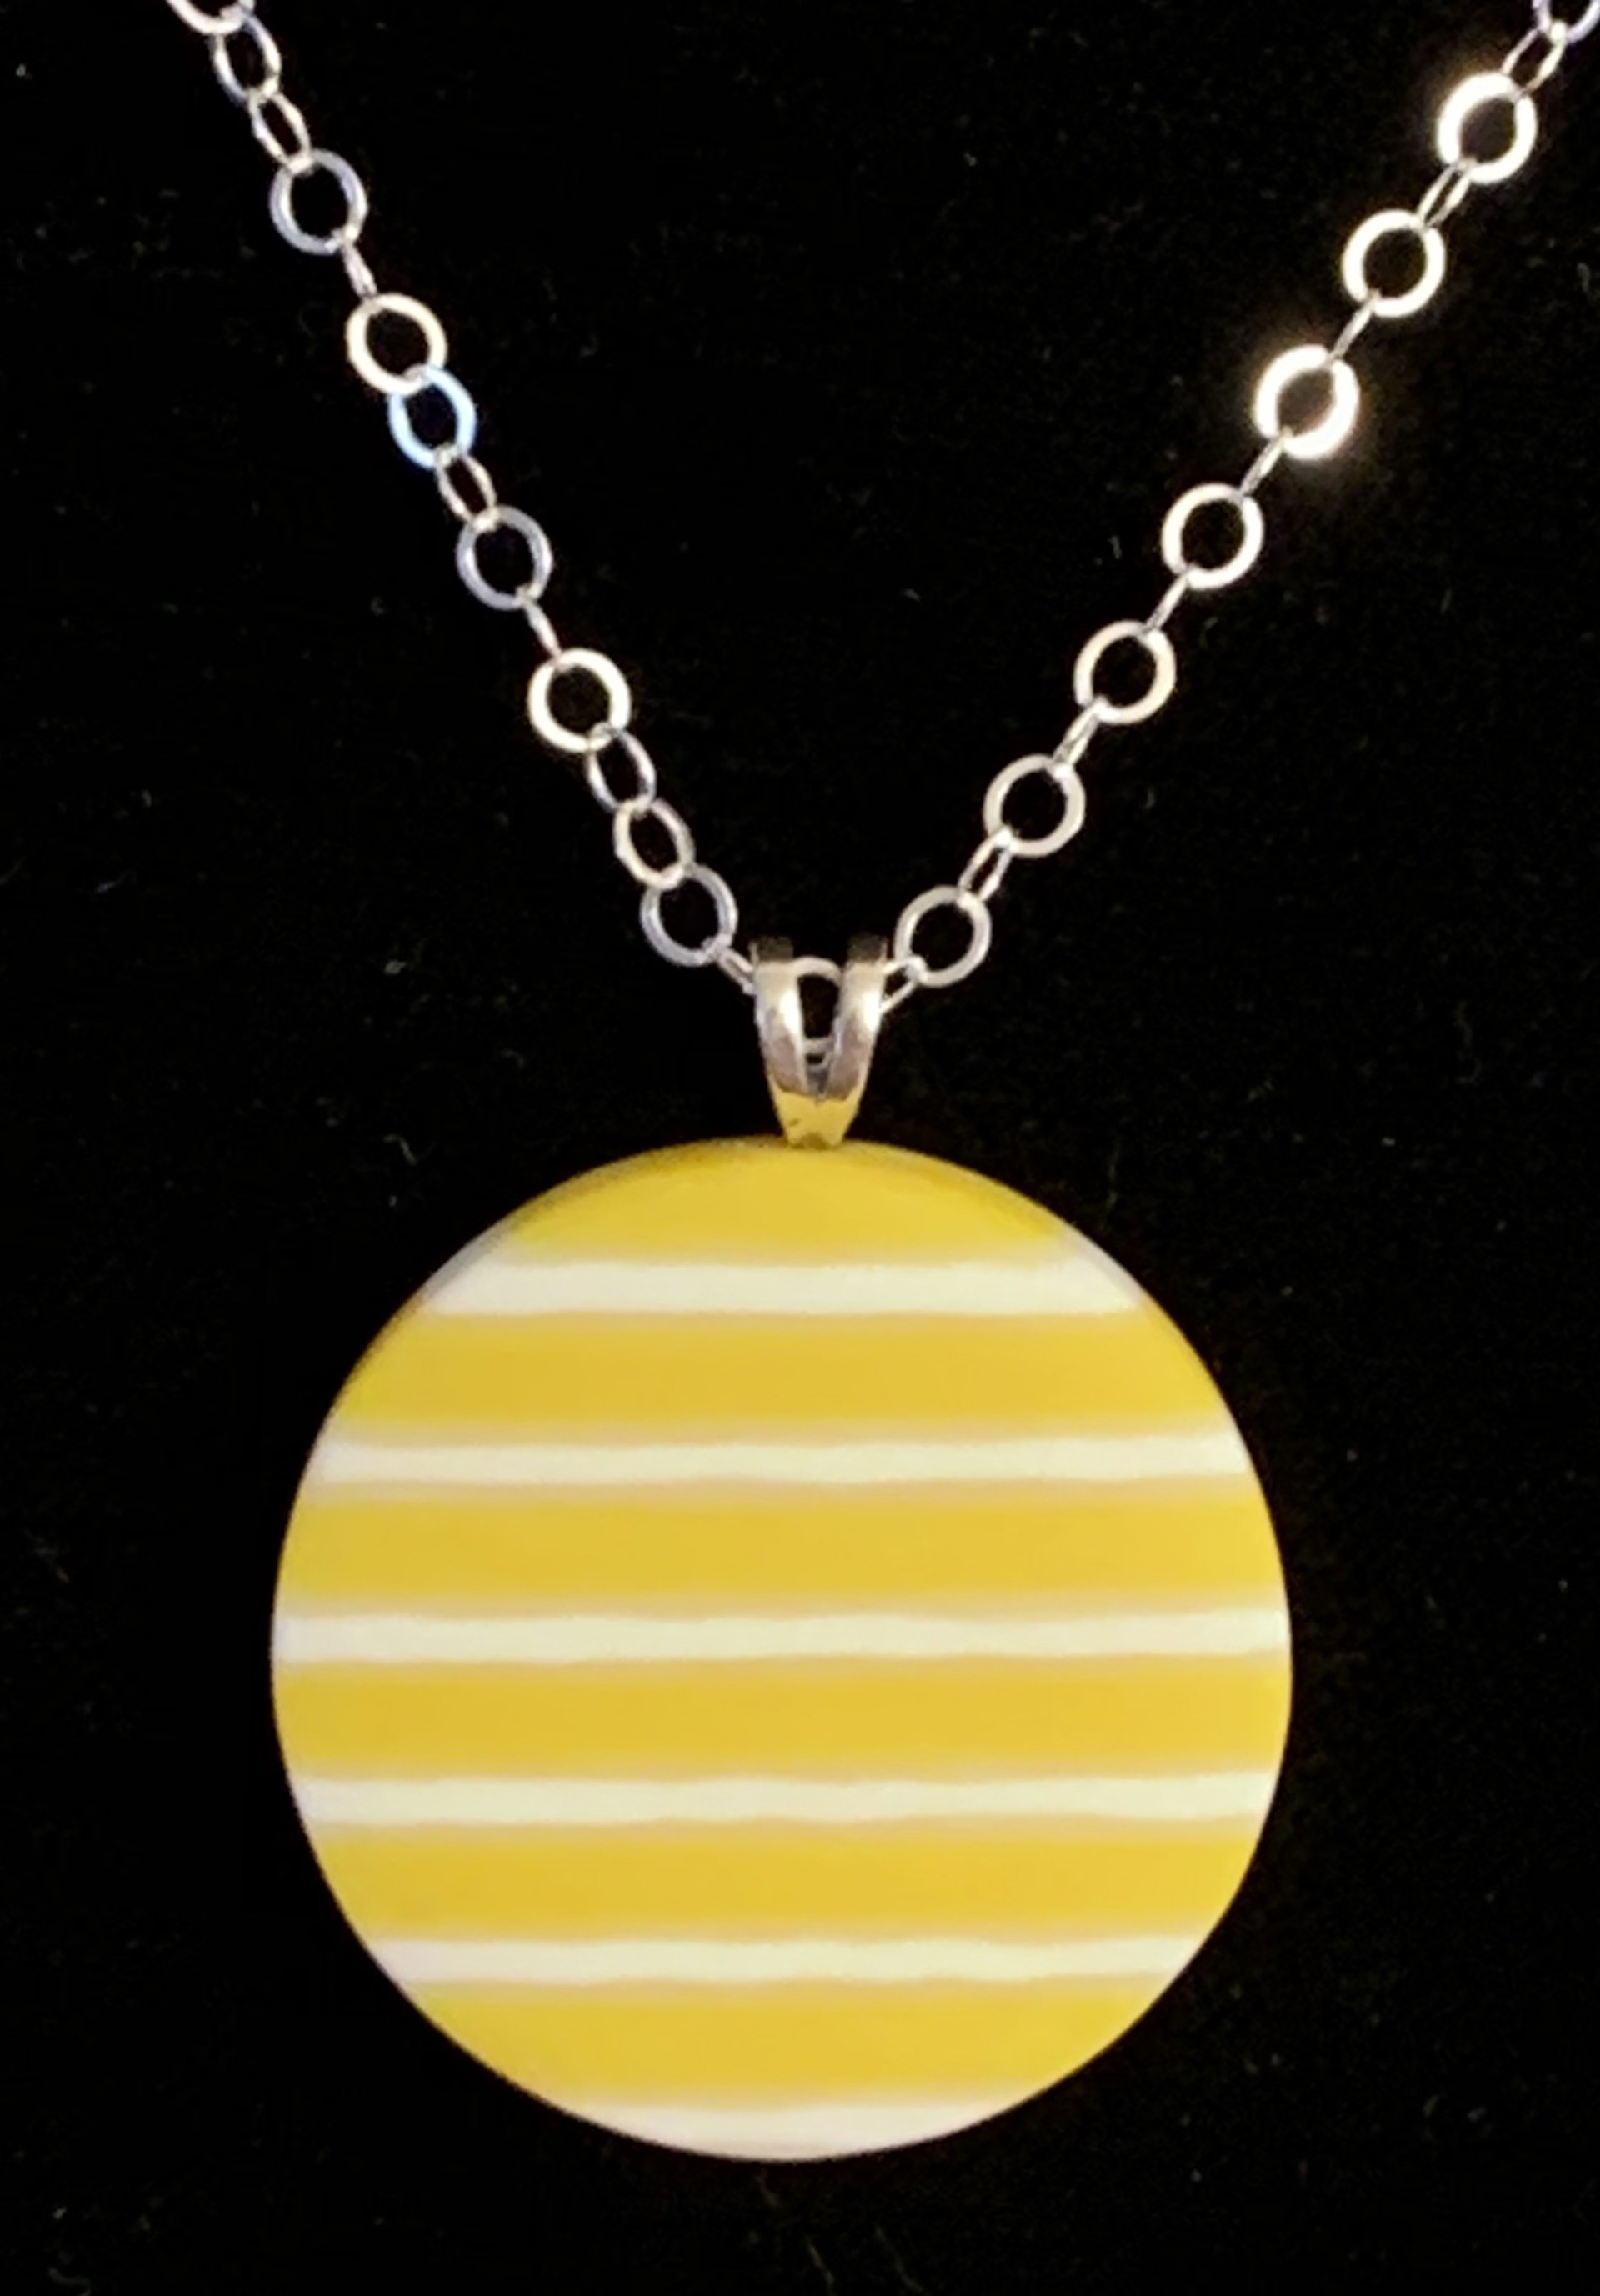 On Edge Necklace - Red/French Vanilla by Chris Cox